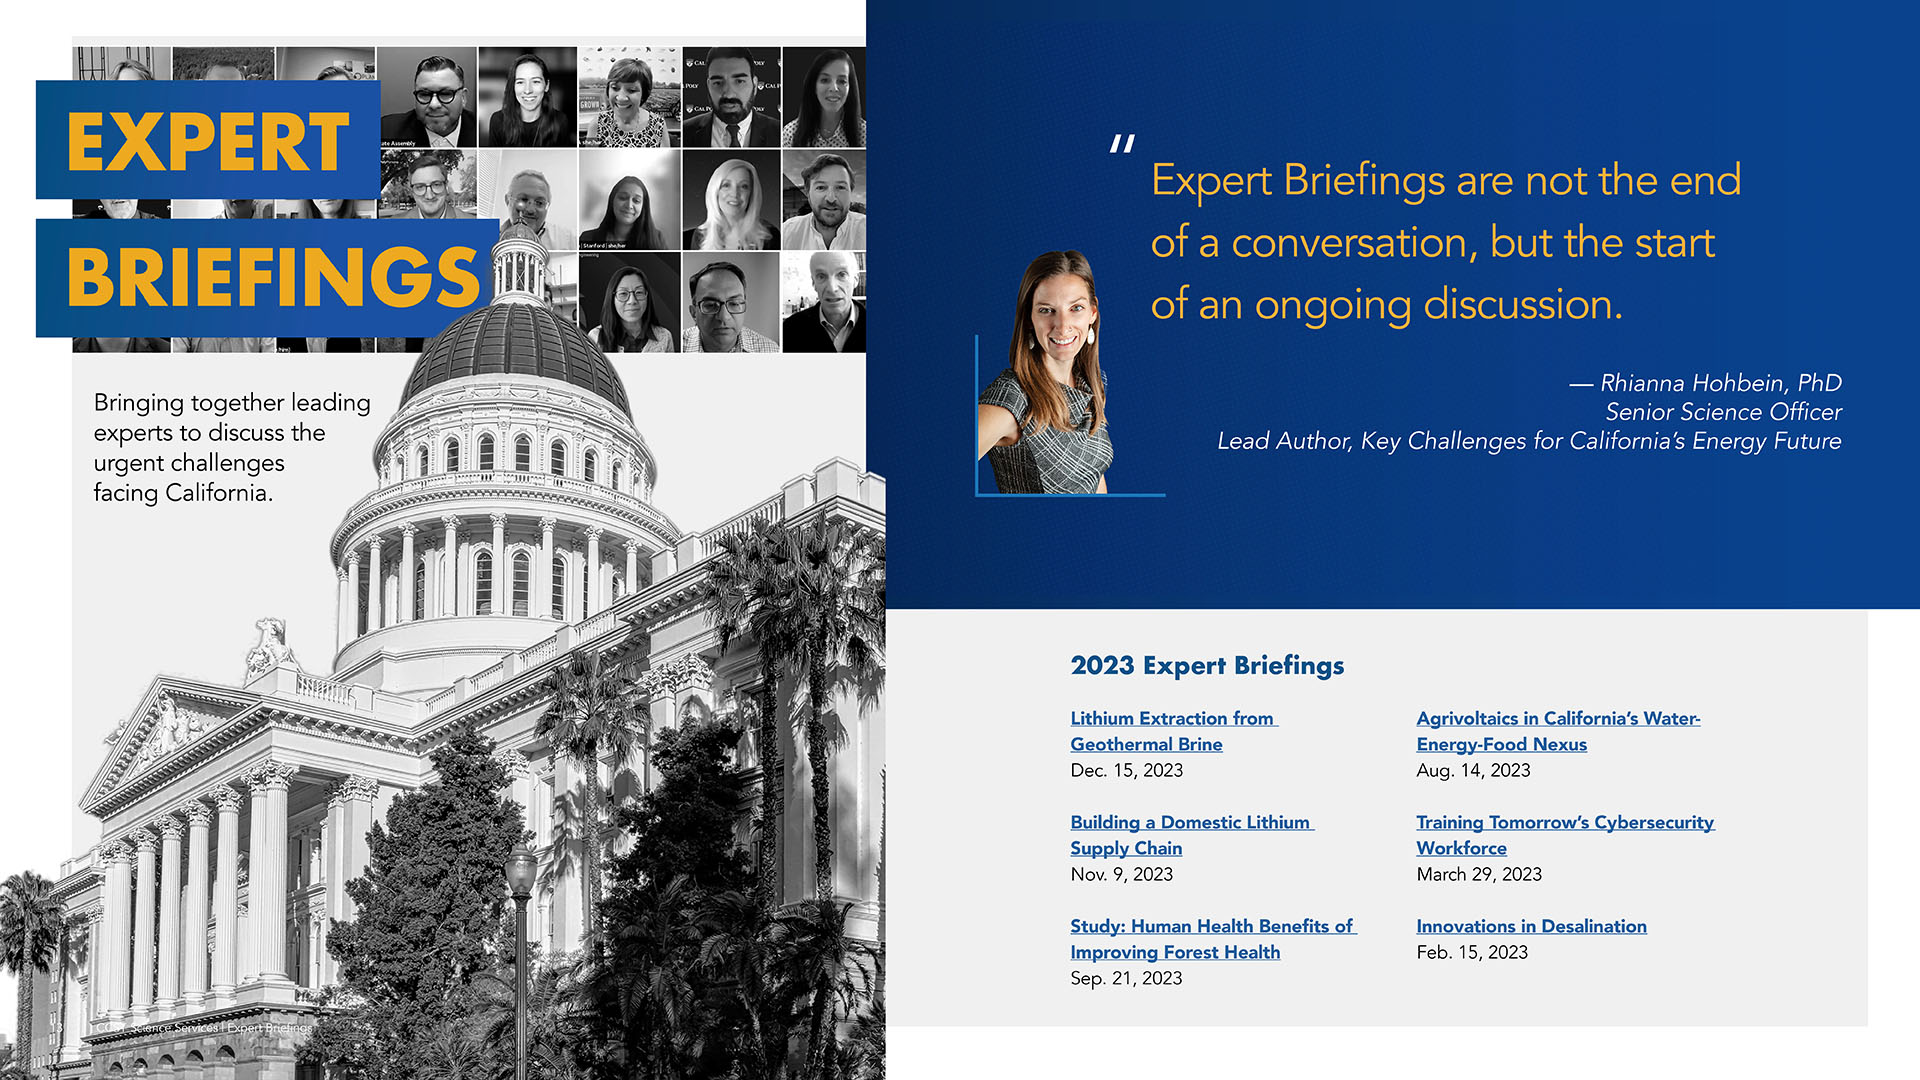 A graphic featuring a large black and white image of the California State Capitol, a background photo grid of Zoom participants, a large quote from Rhianna Hohbein with her image on a blue background, and a list of briefings for the year: "Expert Briefings are not the end of a conversation, but the start of an ongoing discussion."